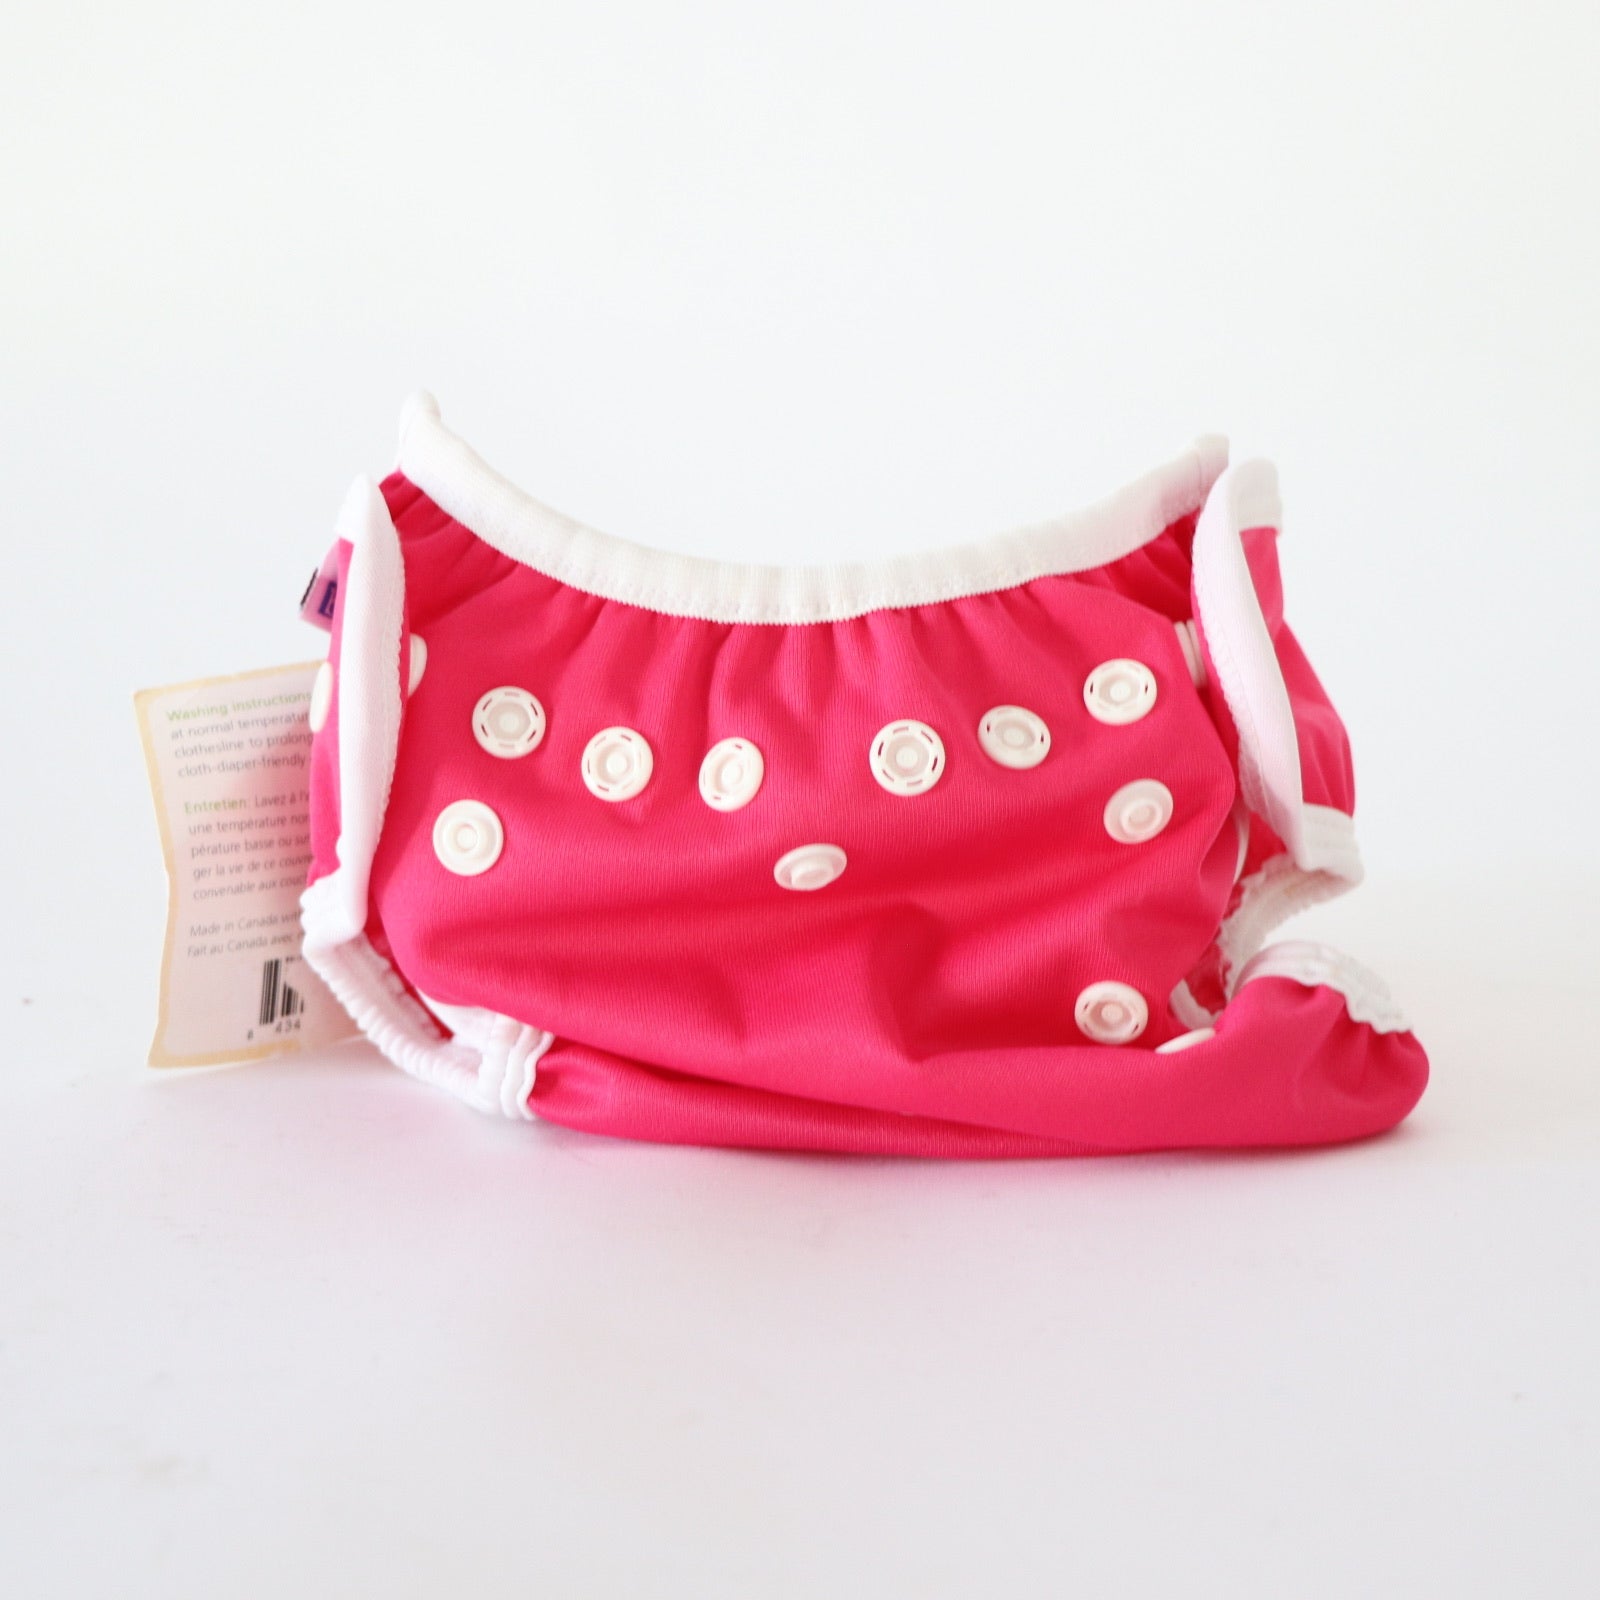 Bummis Simply Lite One Size Diaper Cover 